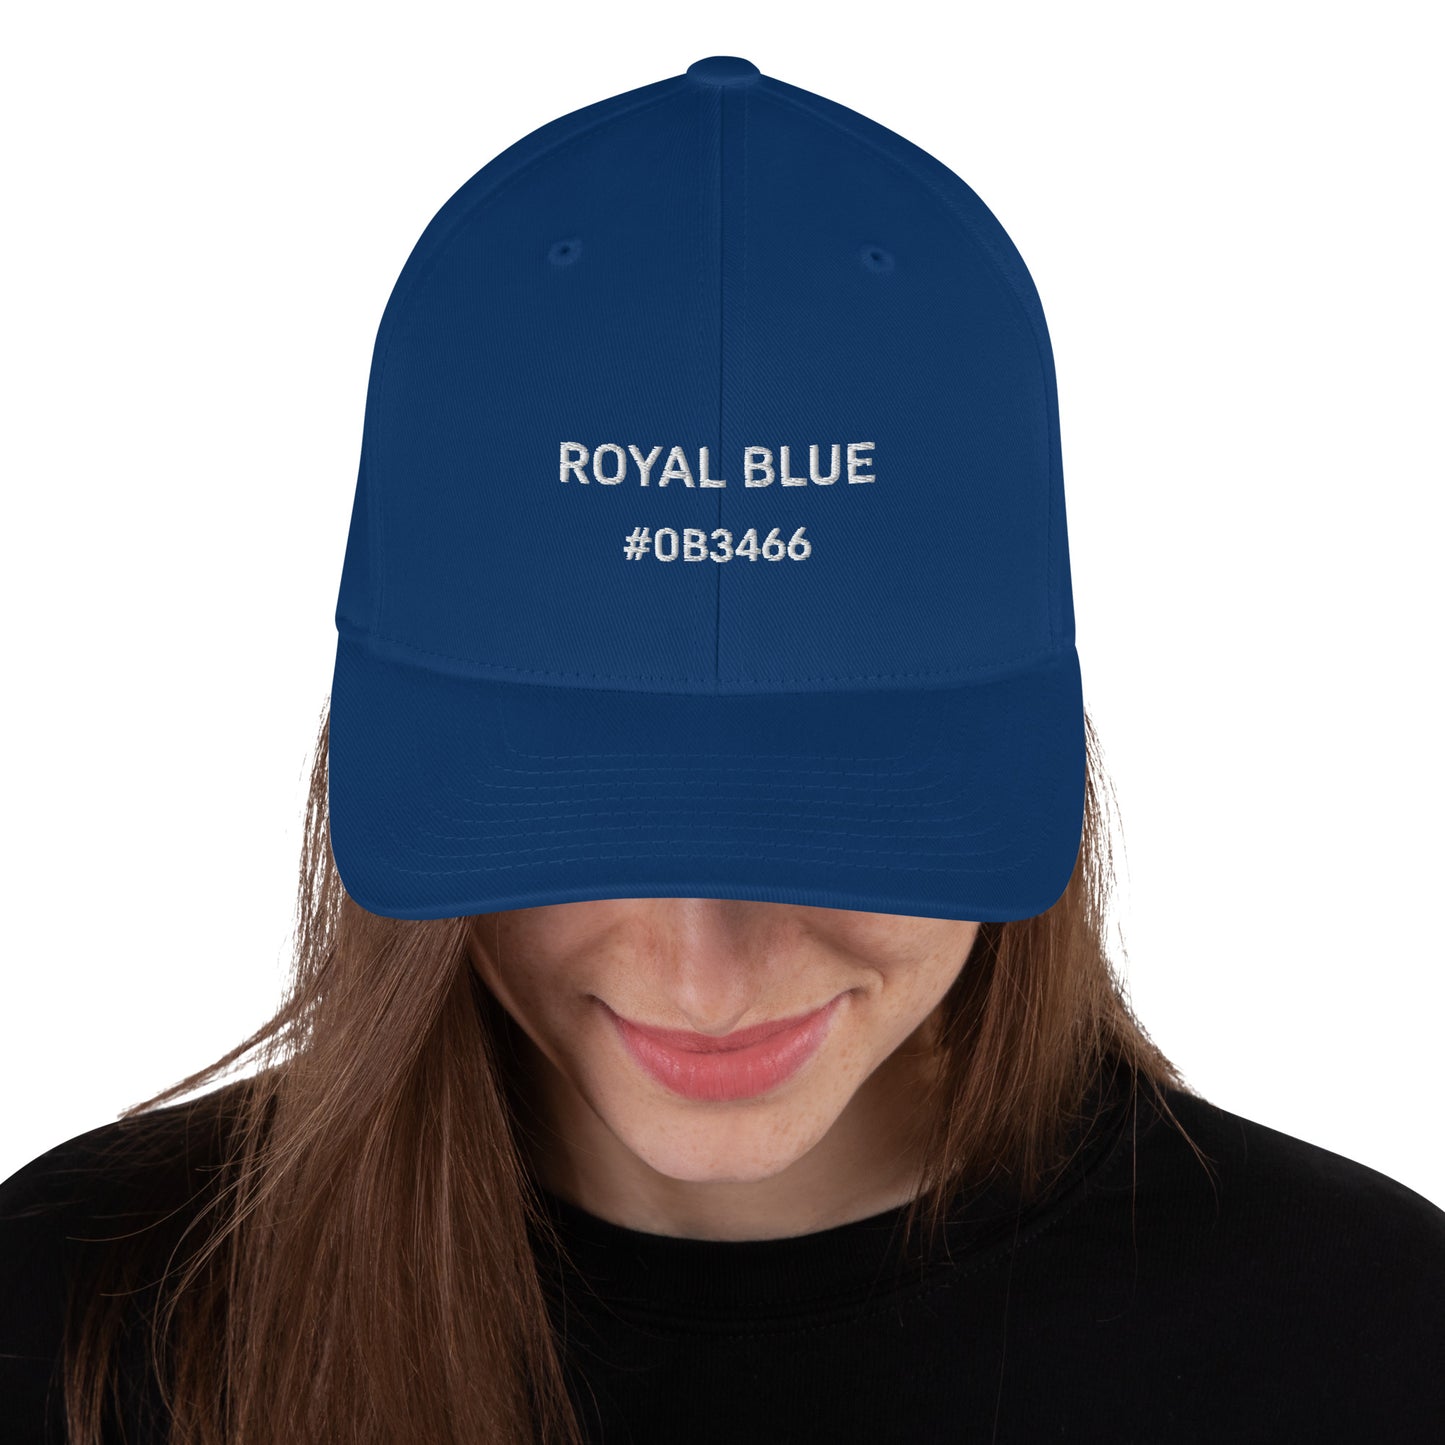 Royal Blue Structured Twill Cap